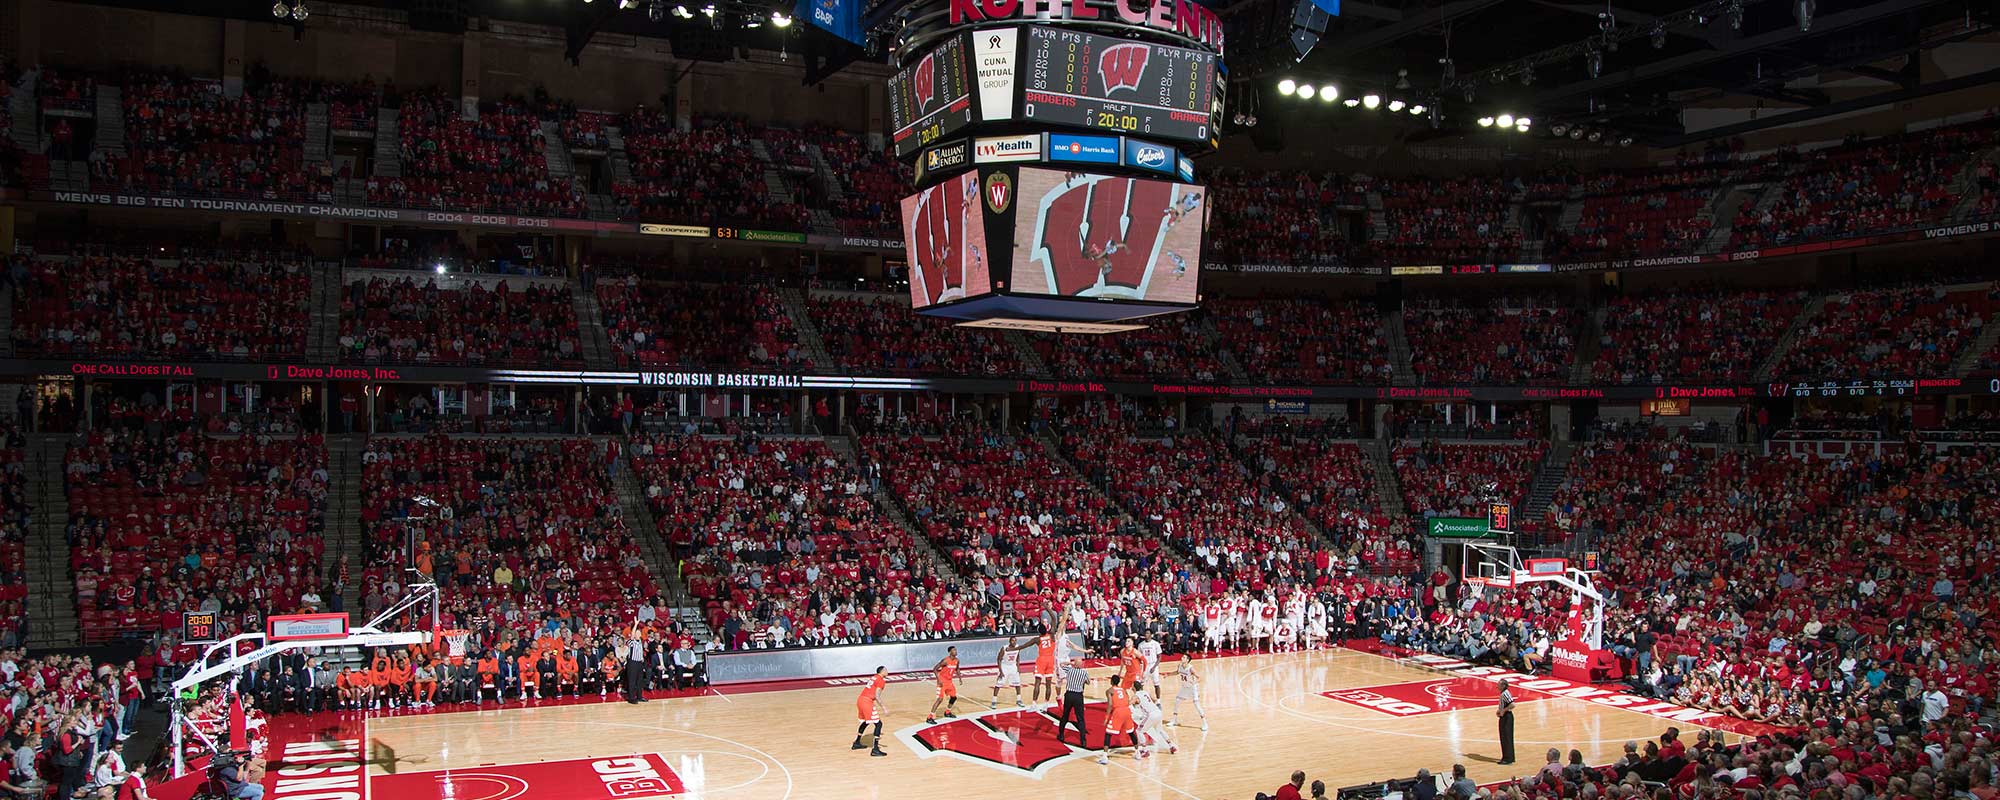 Tip-Off of a UW-Madison Men's Basketball Game at the Kohl Center